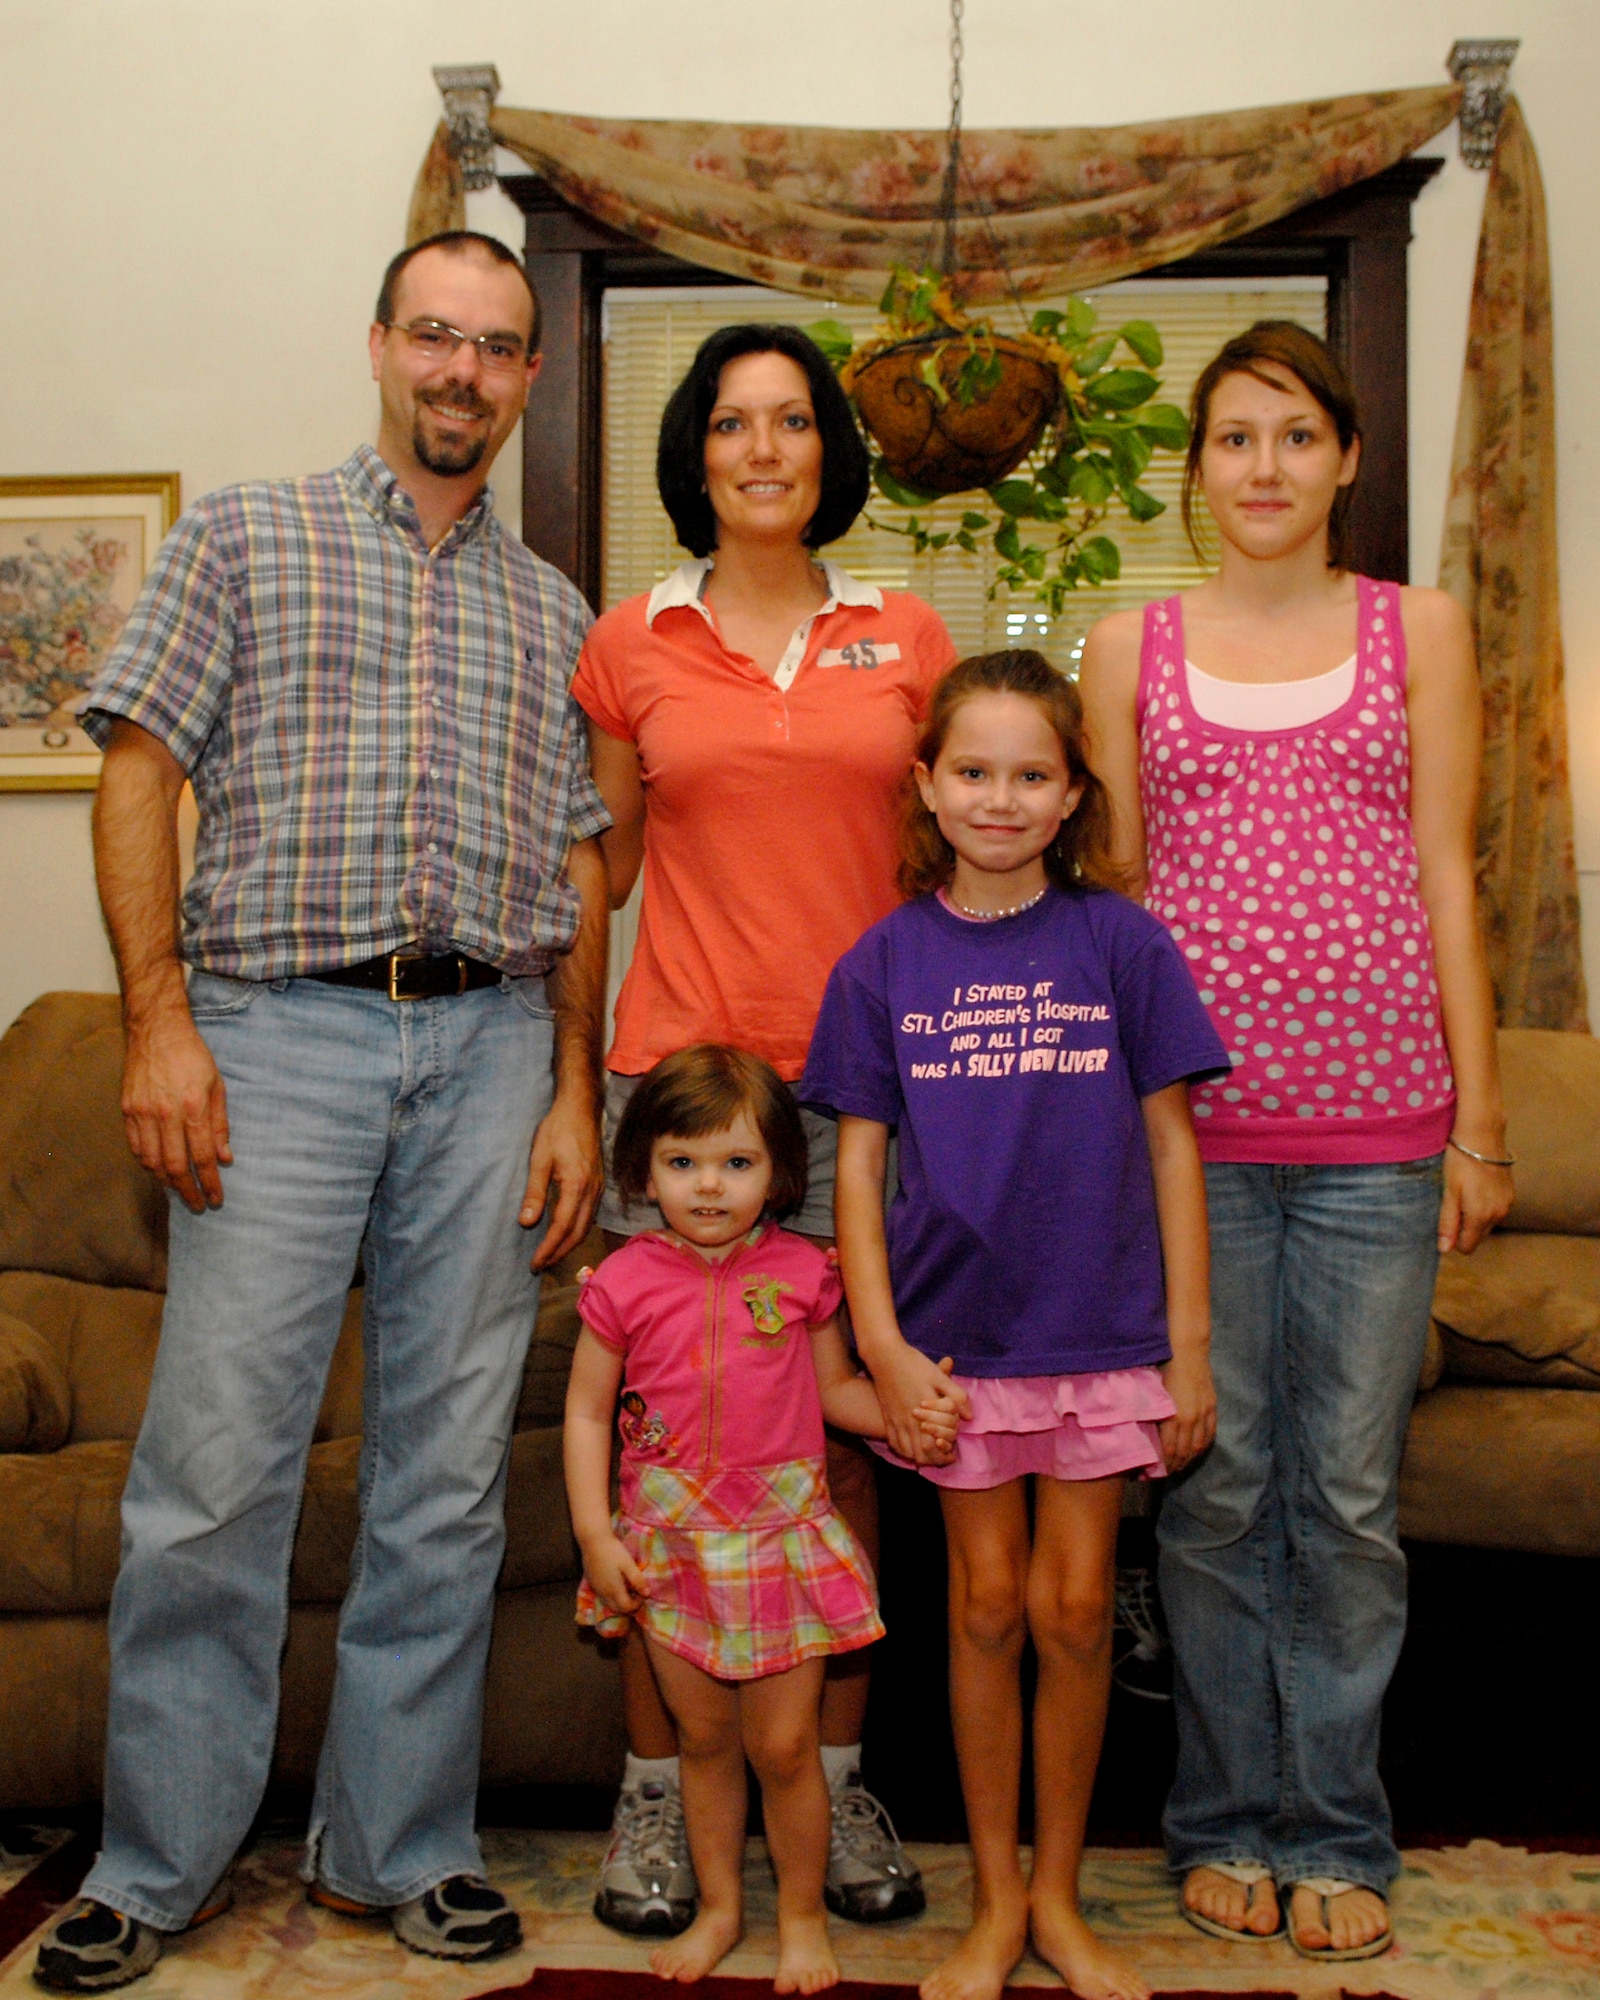 Rachael poses for a photo with her mom, Melissa, sisters Jackie and Samara, and step-dad, Darren, in the living room of the Parks' Belleville home. 

(U.S. Air Force photo/Airman 1st Class Megan Gilliland)